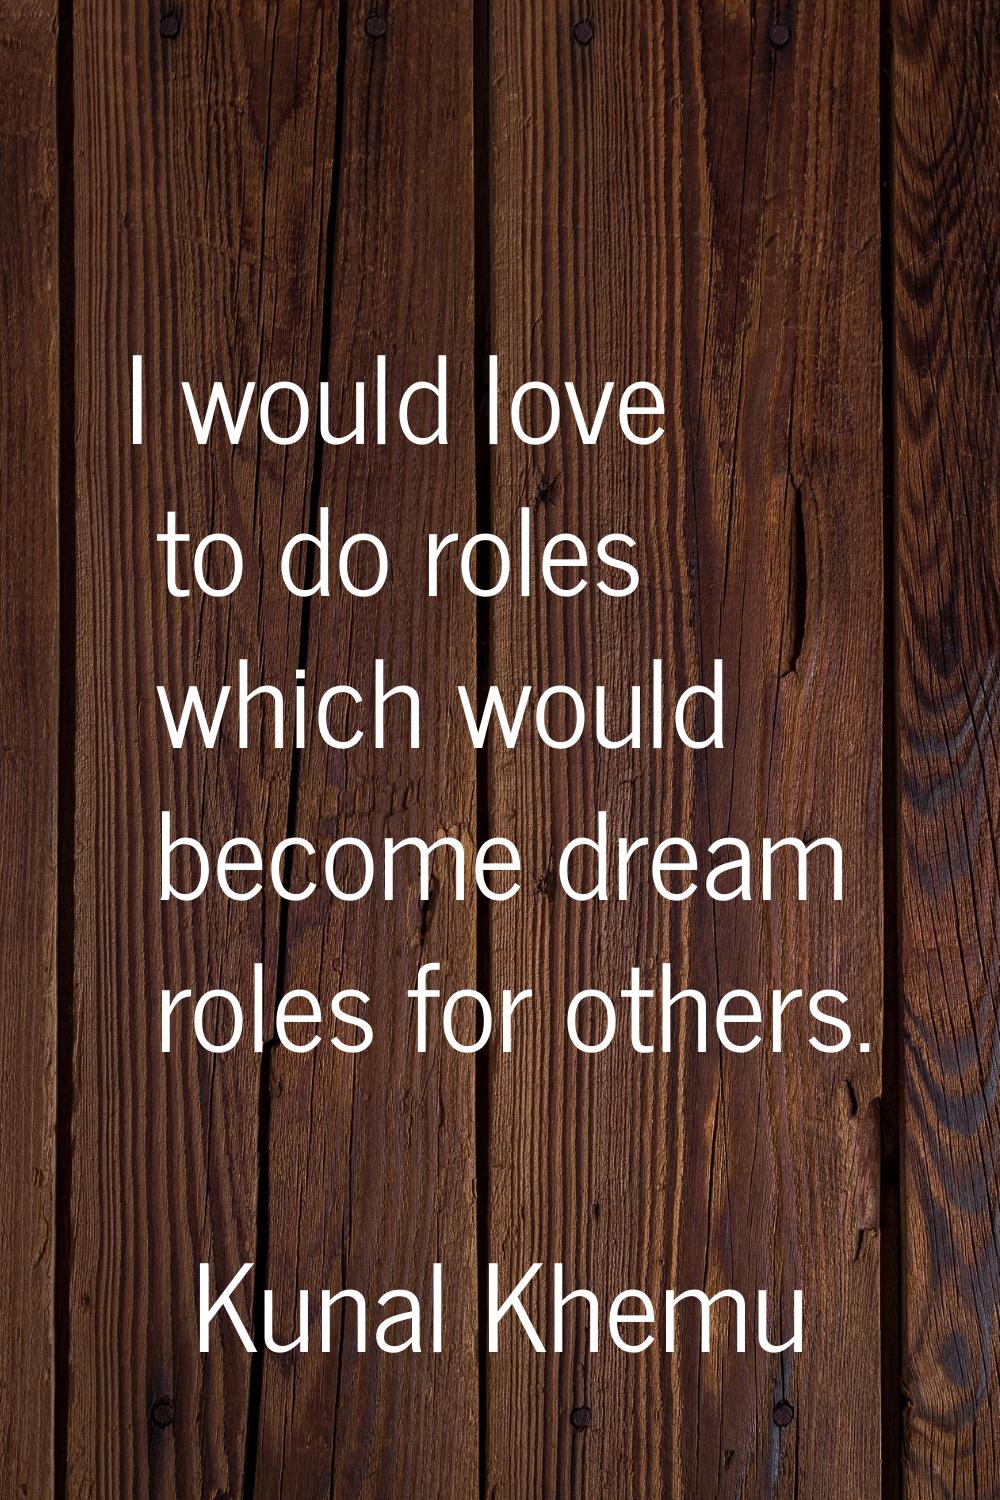 I would love to do roles which would become dream roles for others.